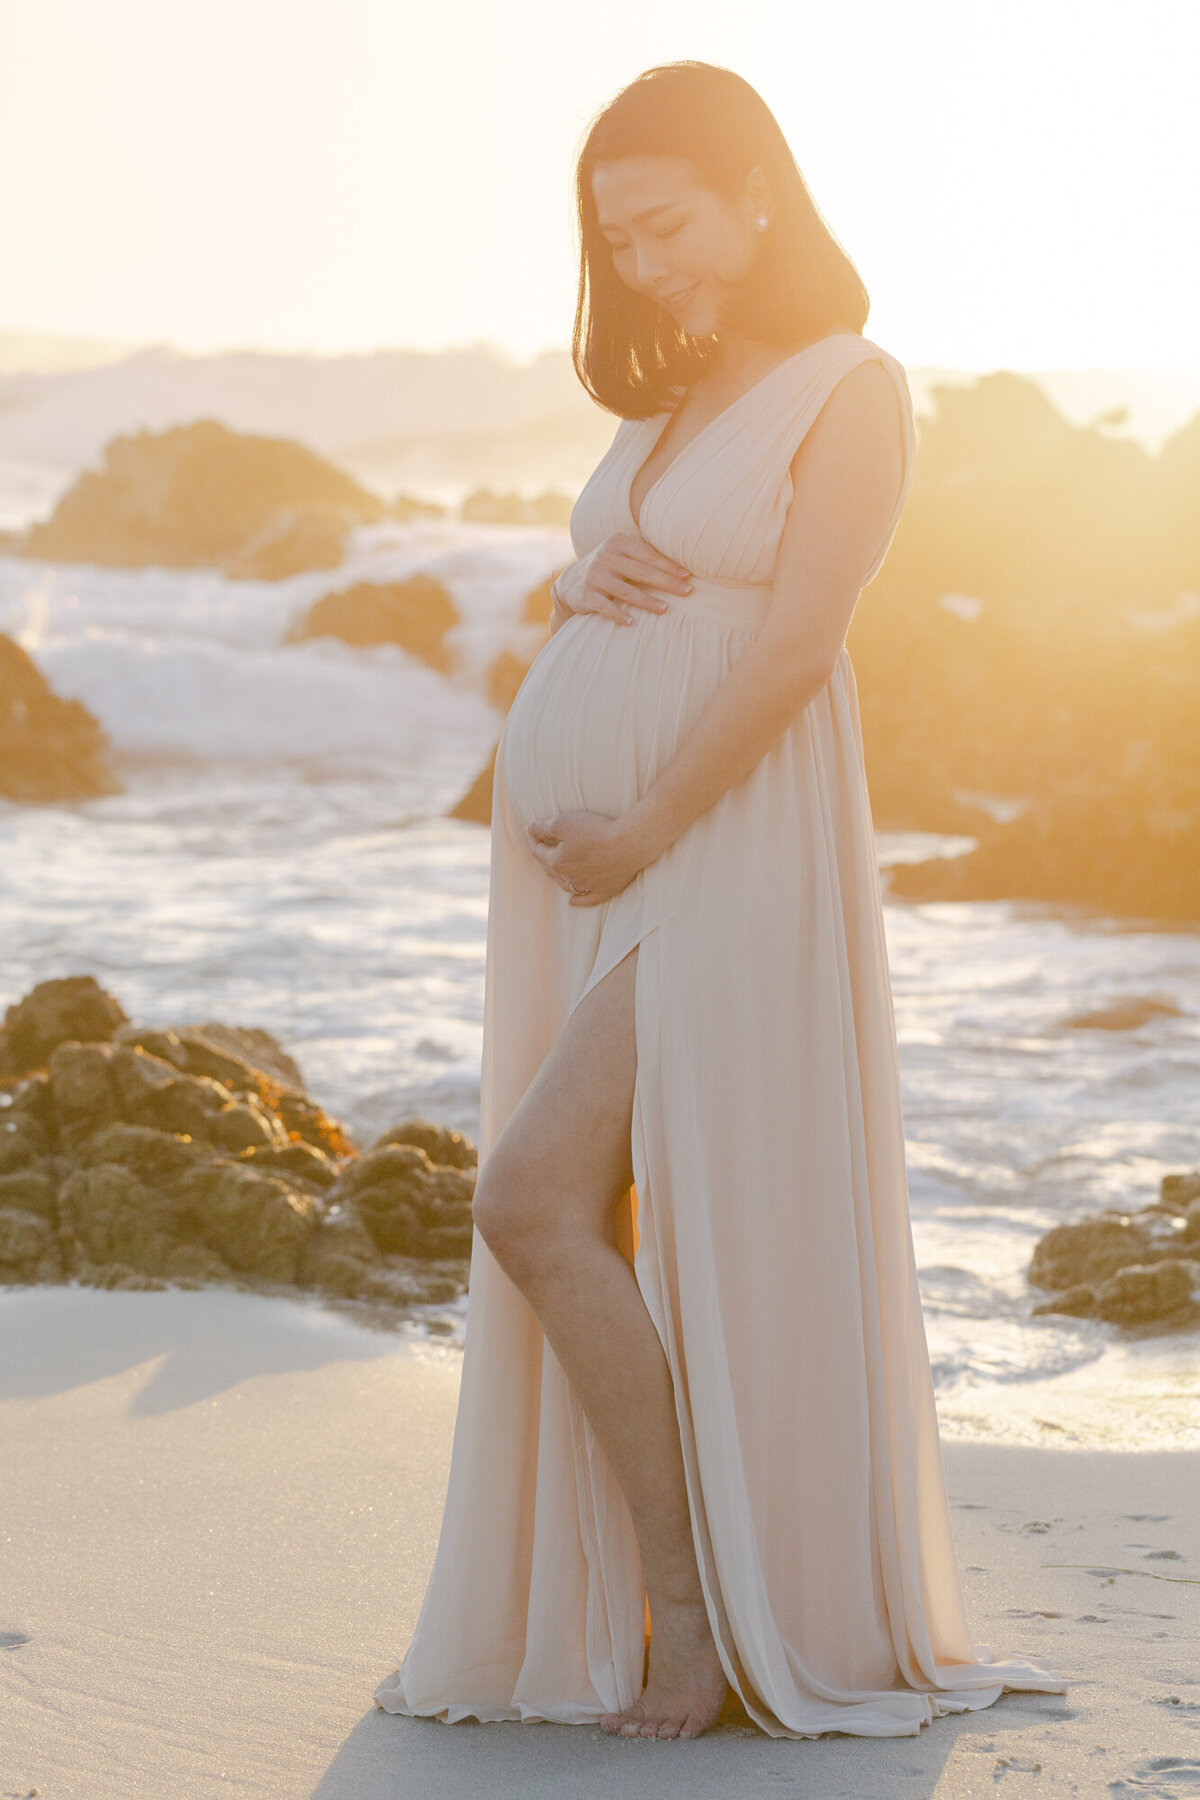 PERRUCCIPHOTO_PEBBLE_BEACH_FAMILY_MATERNITY_SESSION_60